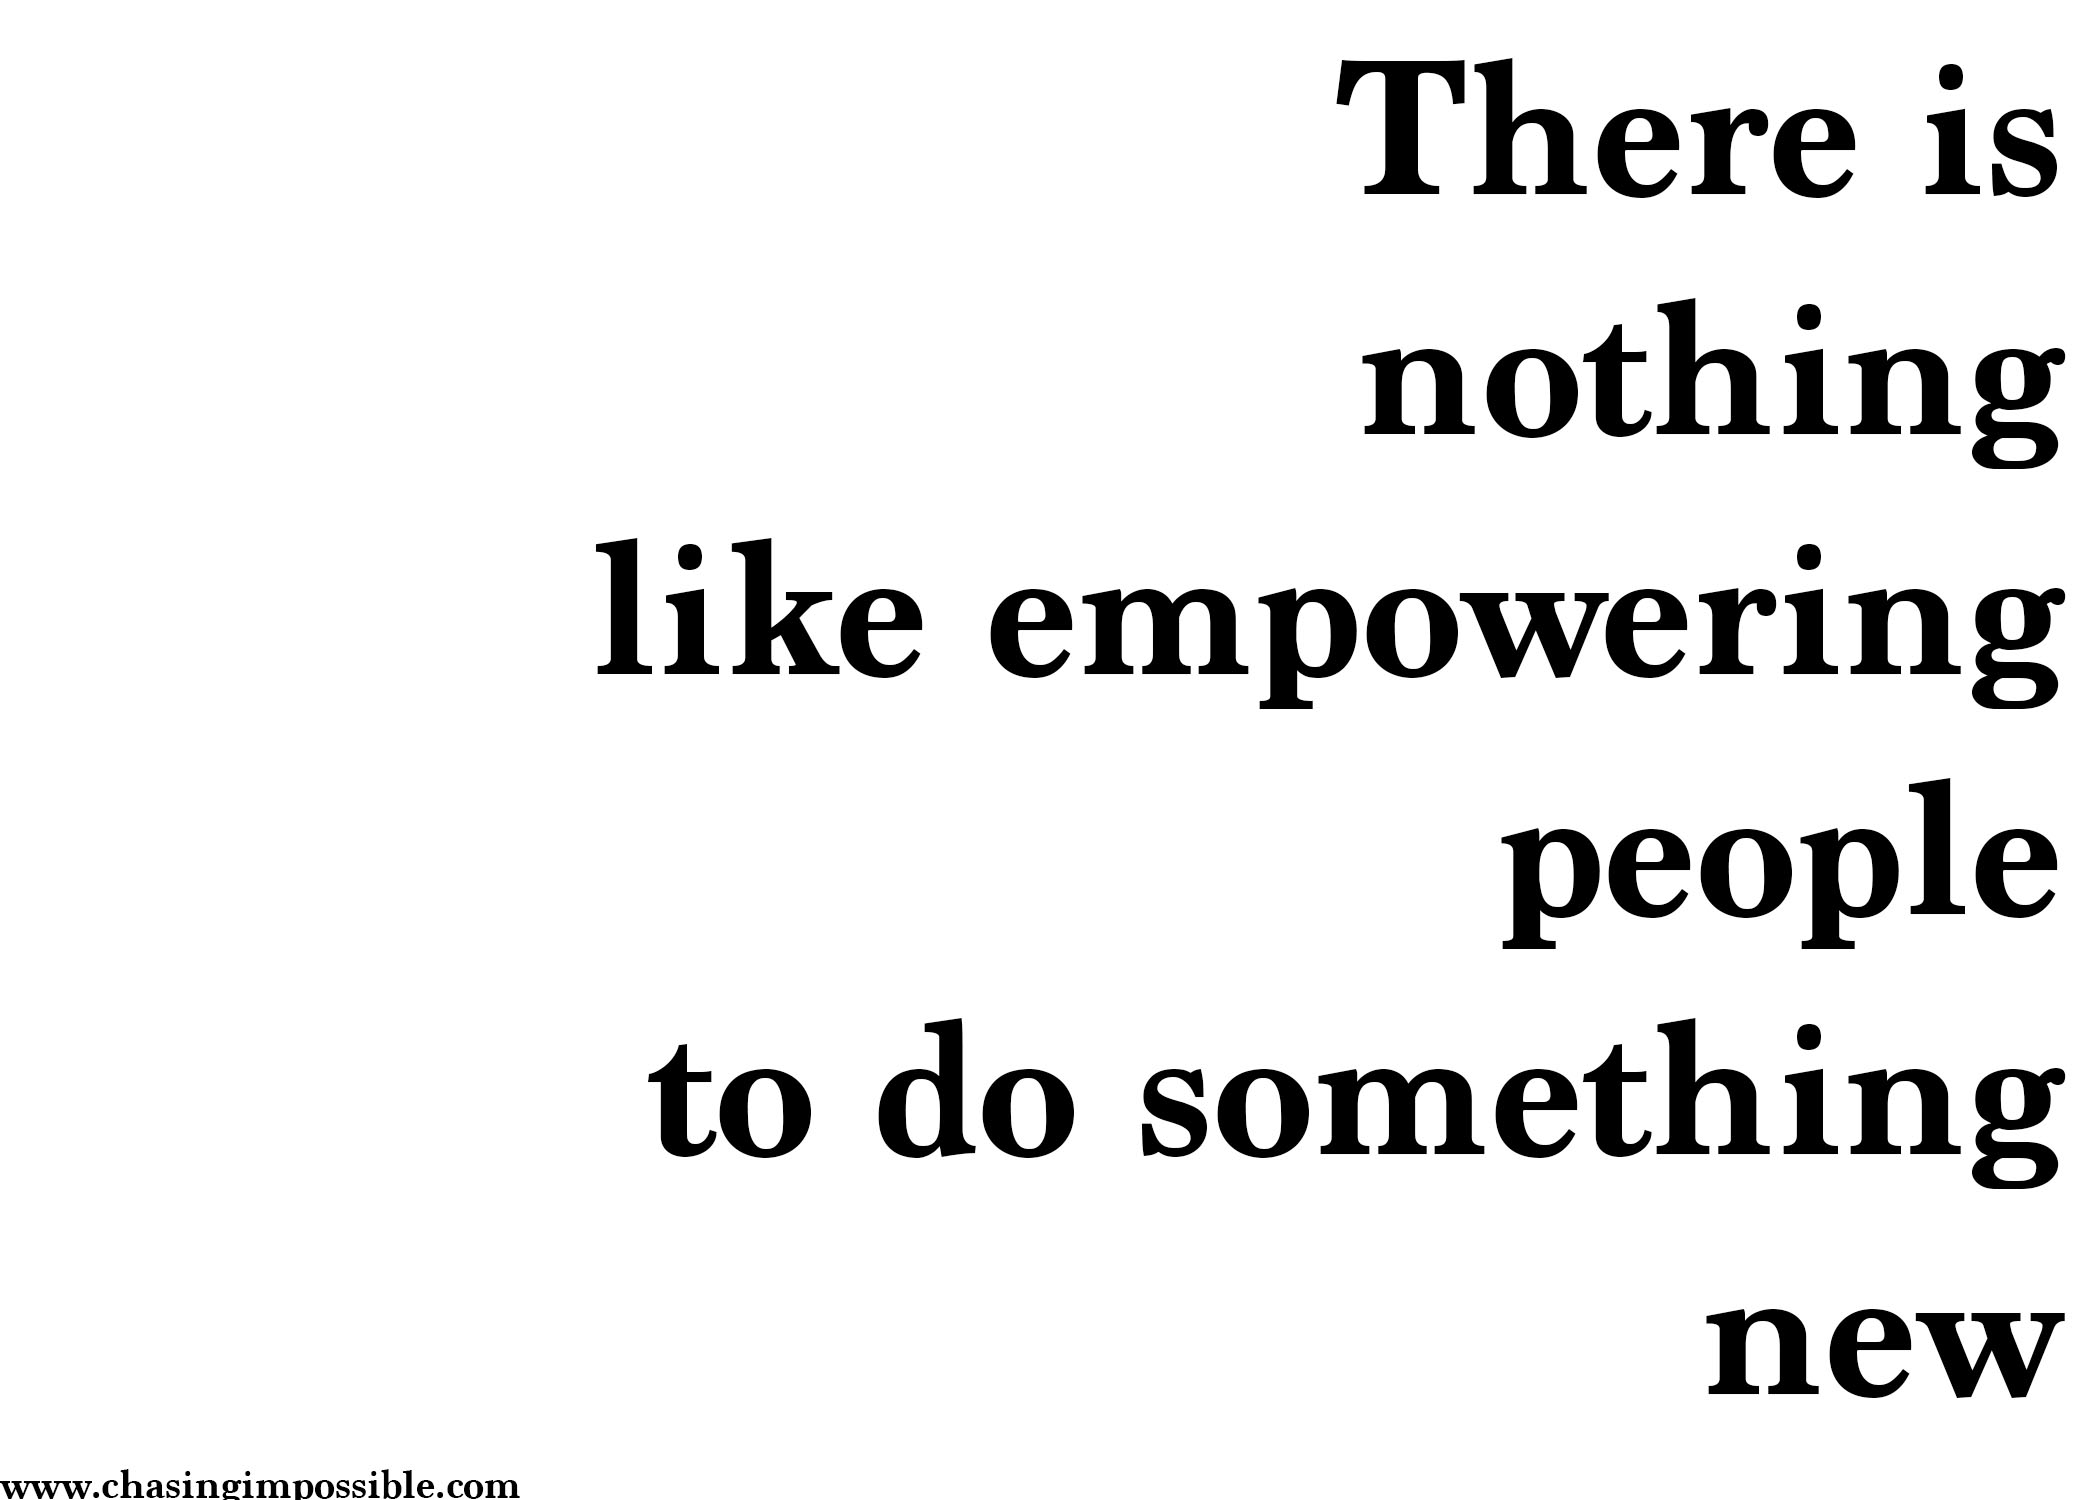 There is nothing like empowering people to do something new